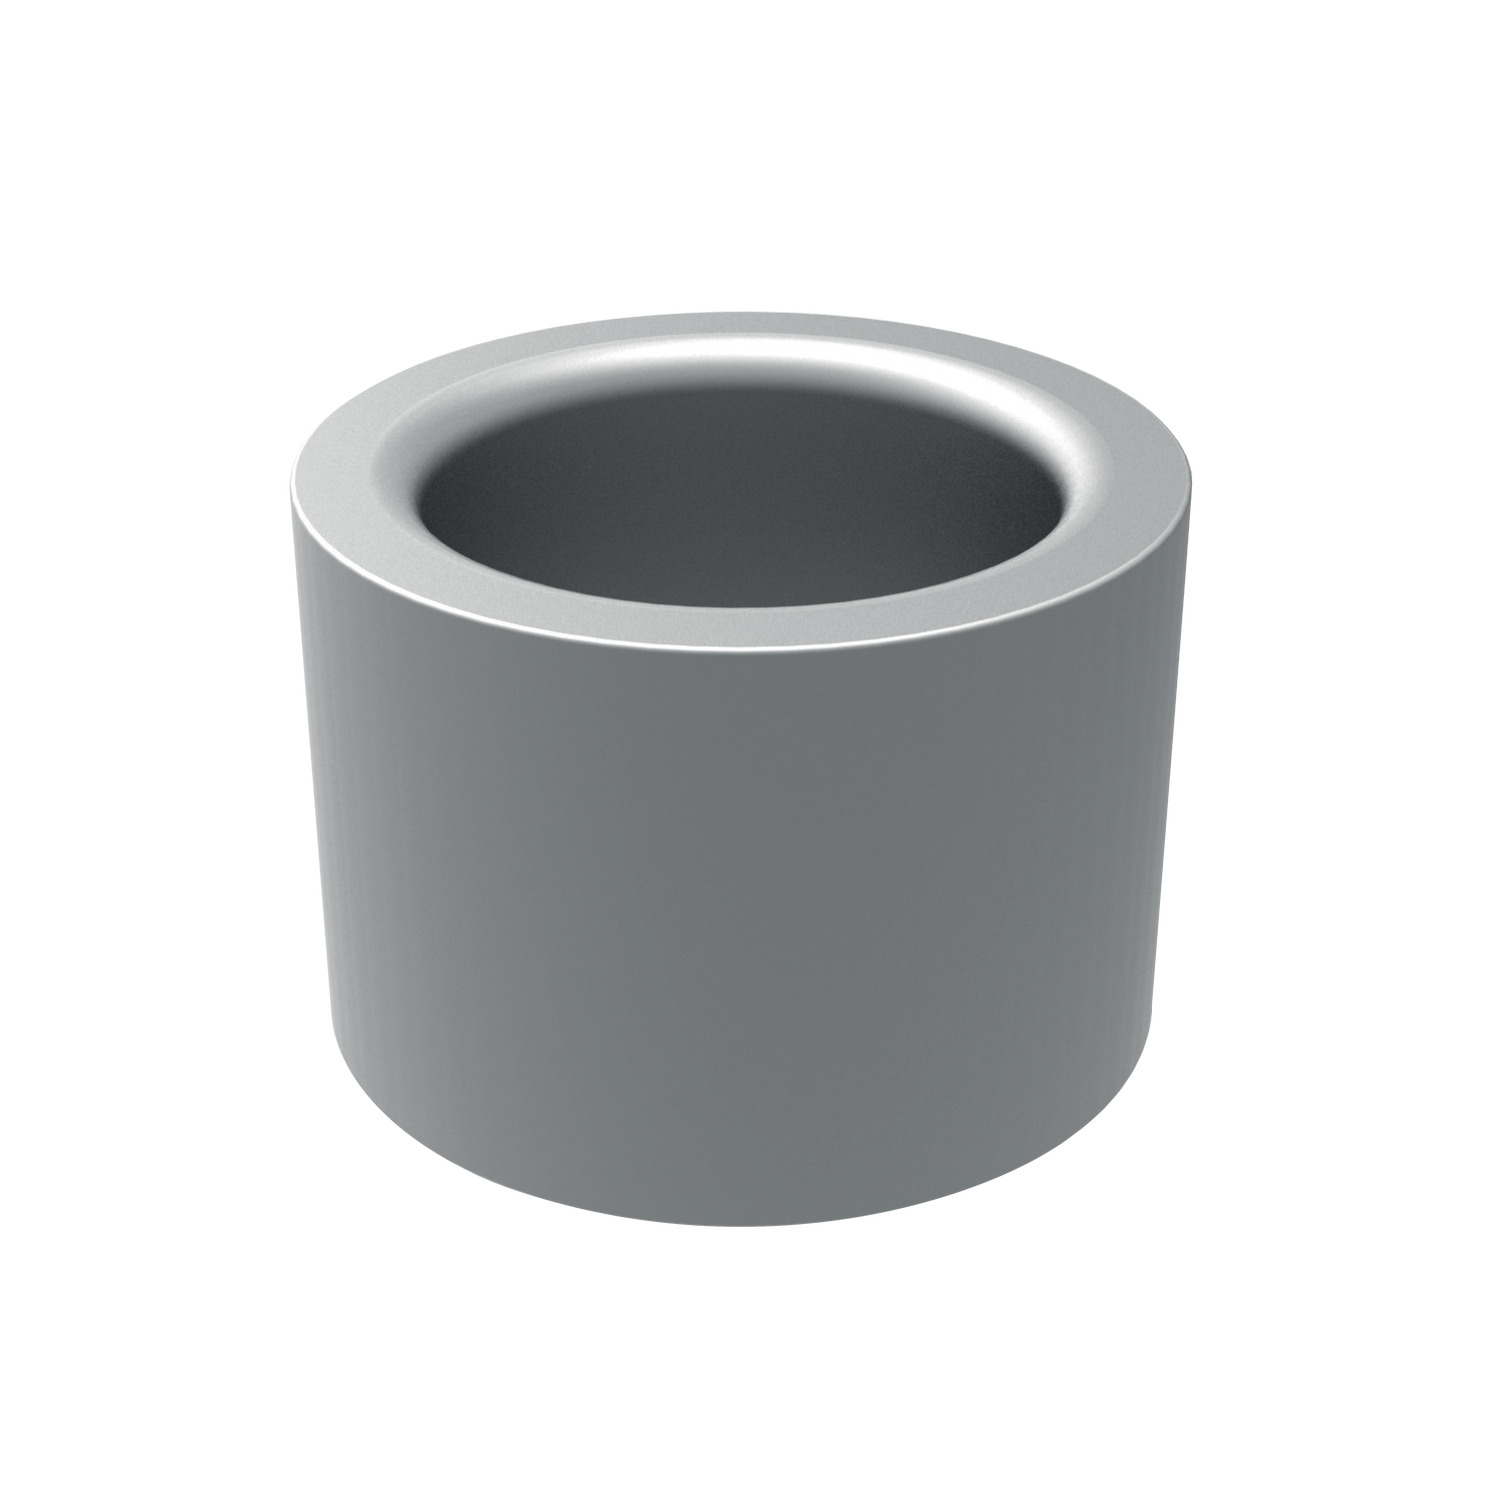 Liner Bushing - Standard Combined with the 12095 locator unit system, this will create the highest possible machining accuracy.